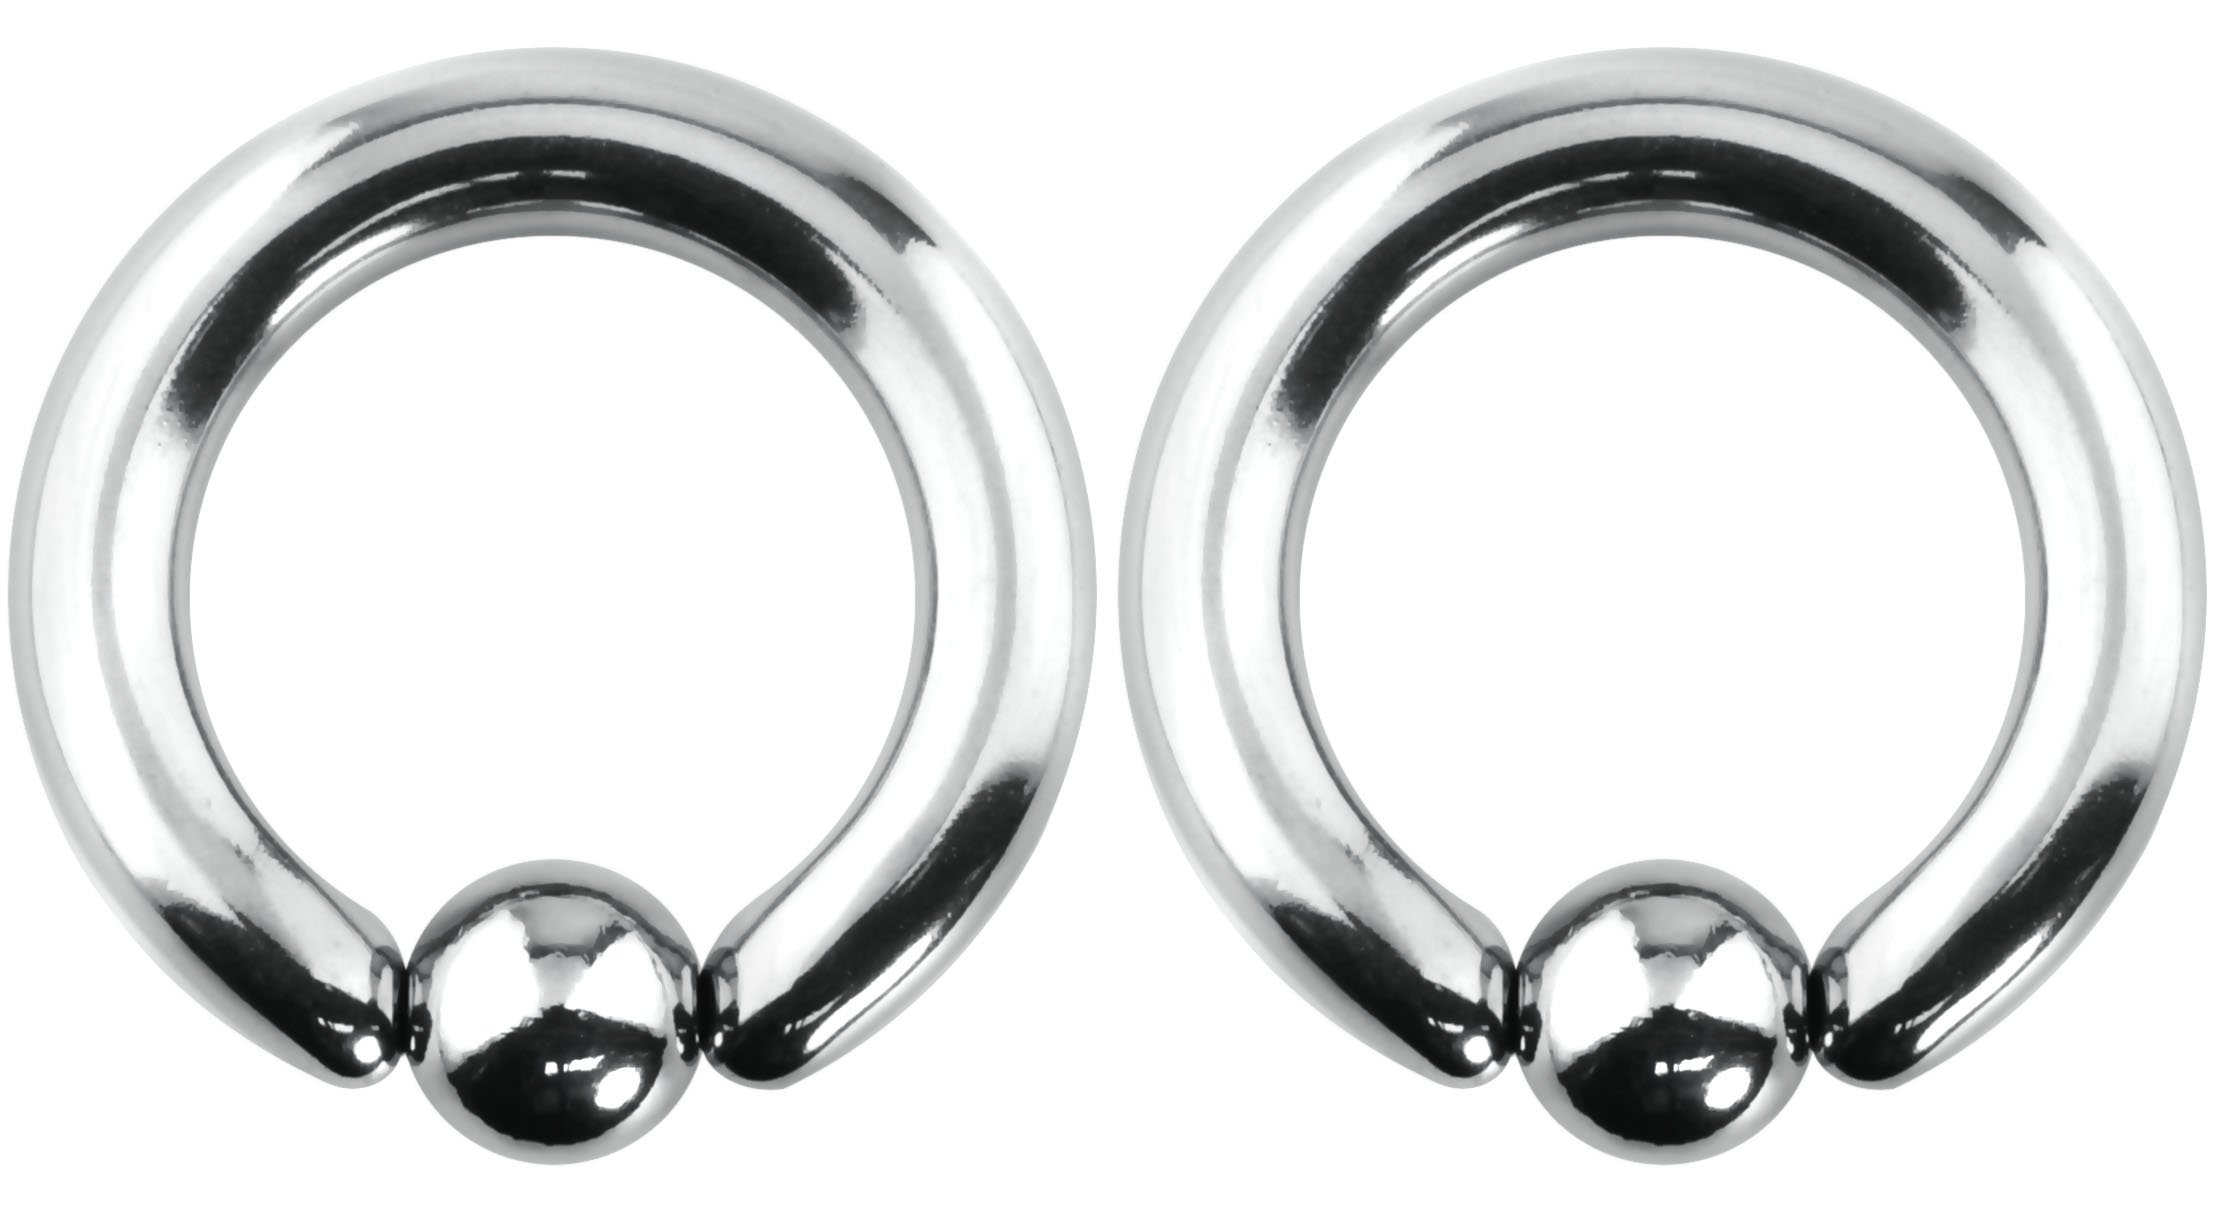 Captive Bead Ring Jewelry Anodized Over Surgical Steel Hematite Ball 14g 12 Pack 